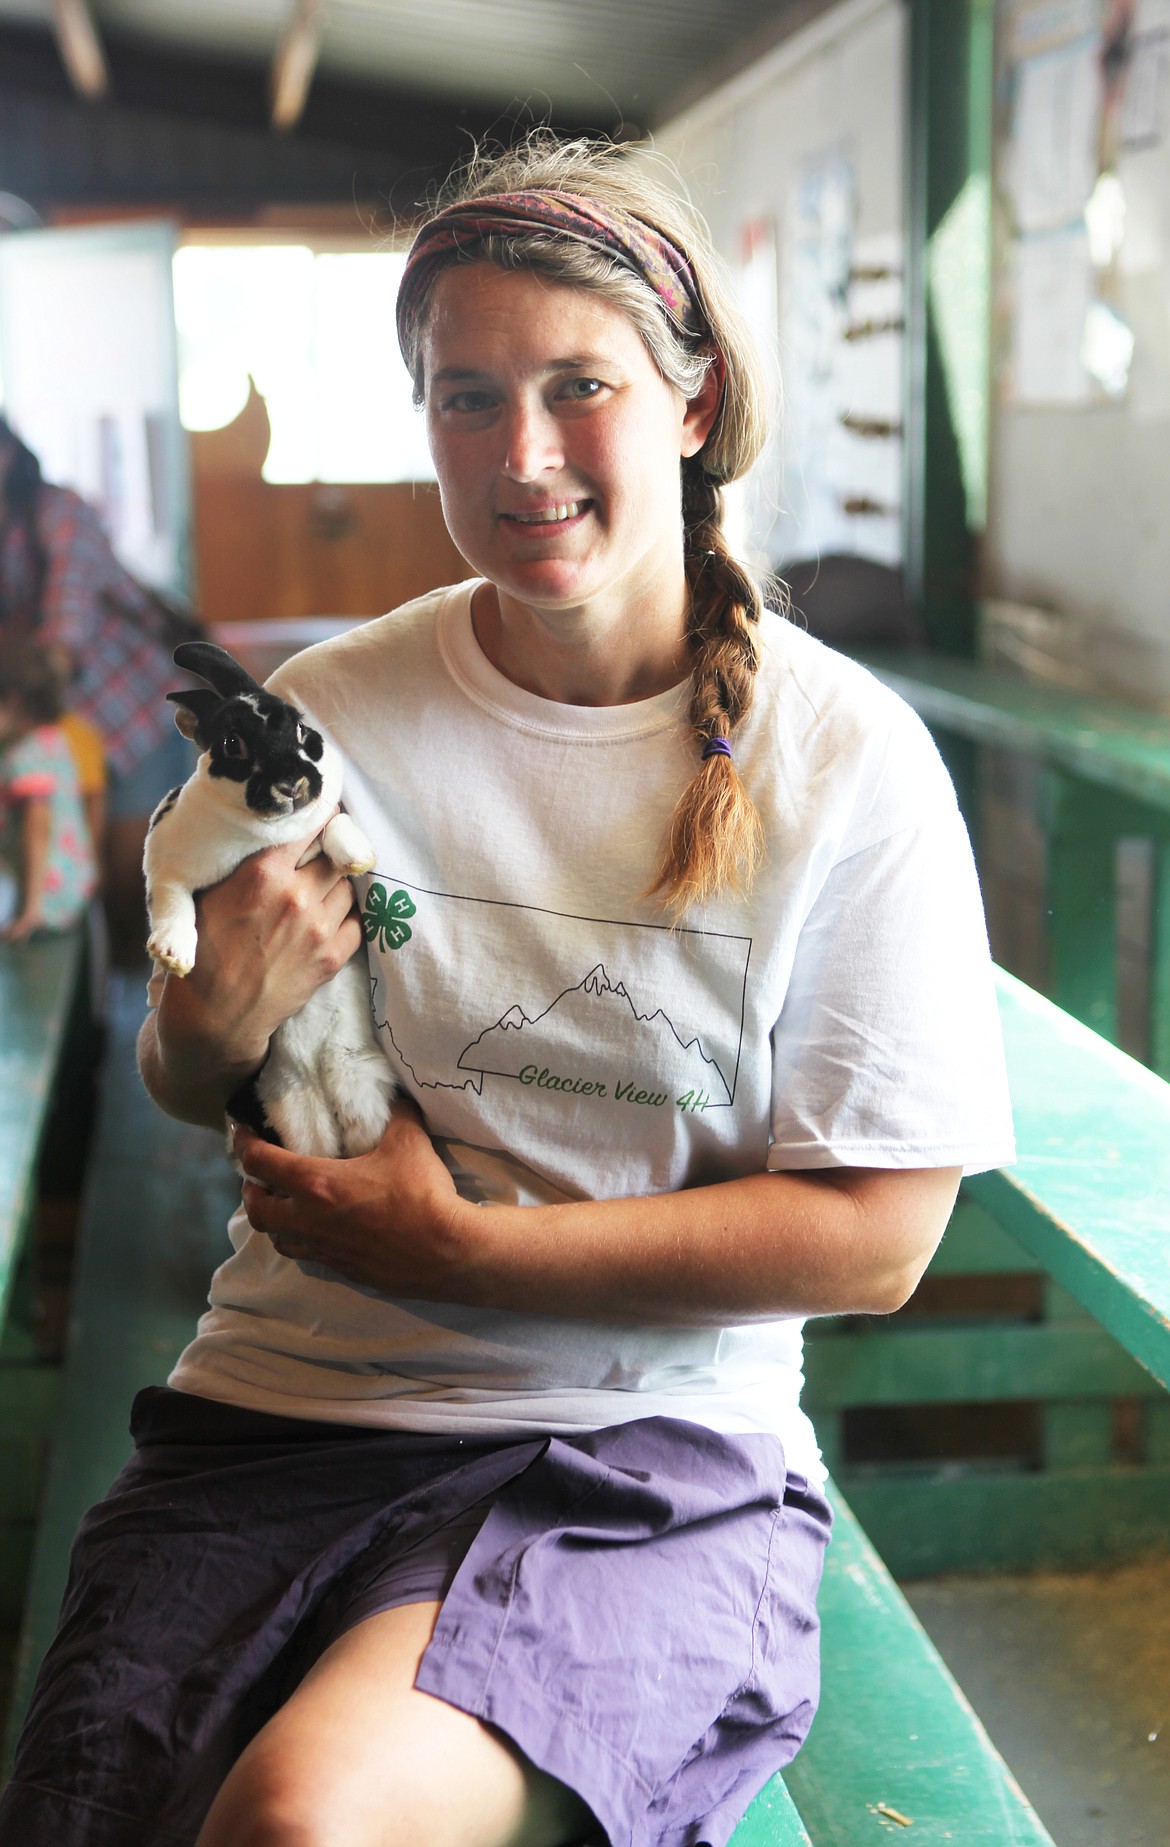 KellySue Bain holds a bunny inside the rabbit barn Thursday afternoon. Bain was instrumental in bringing the bunny jump competition to the fair this year and is planning to hold an additional contest in September. (Mackenzie Reiss/Daily Inter Lake)